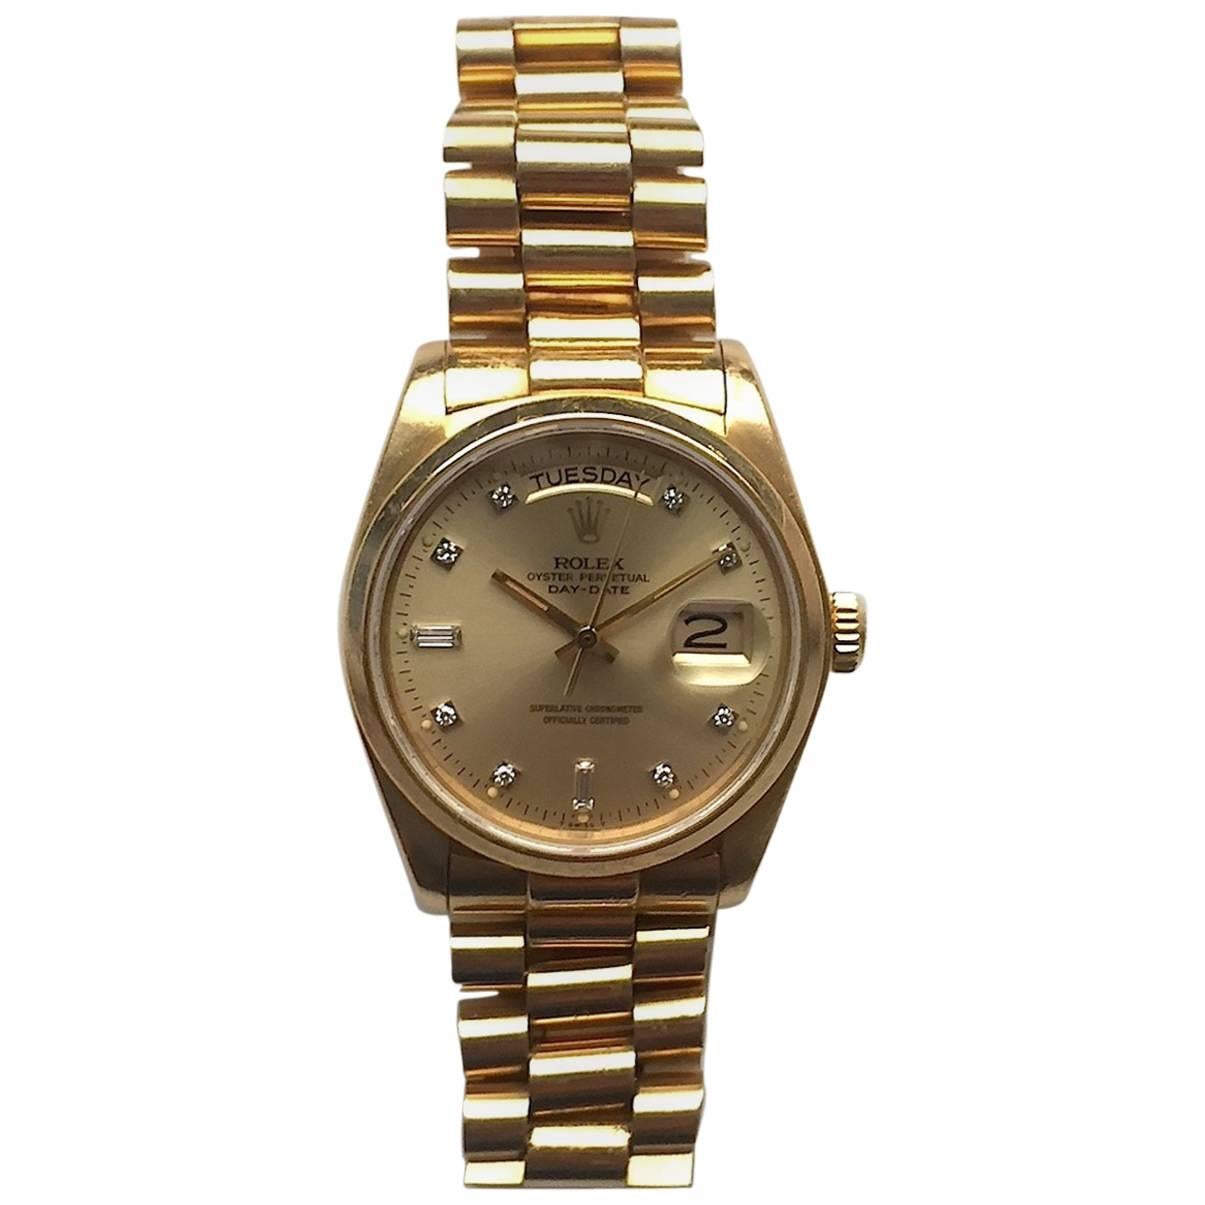 Rolex 18K Yellow Gold Oyster Perpetual Day-Date Presidential Watch